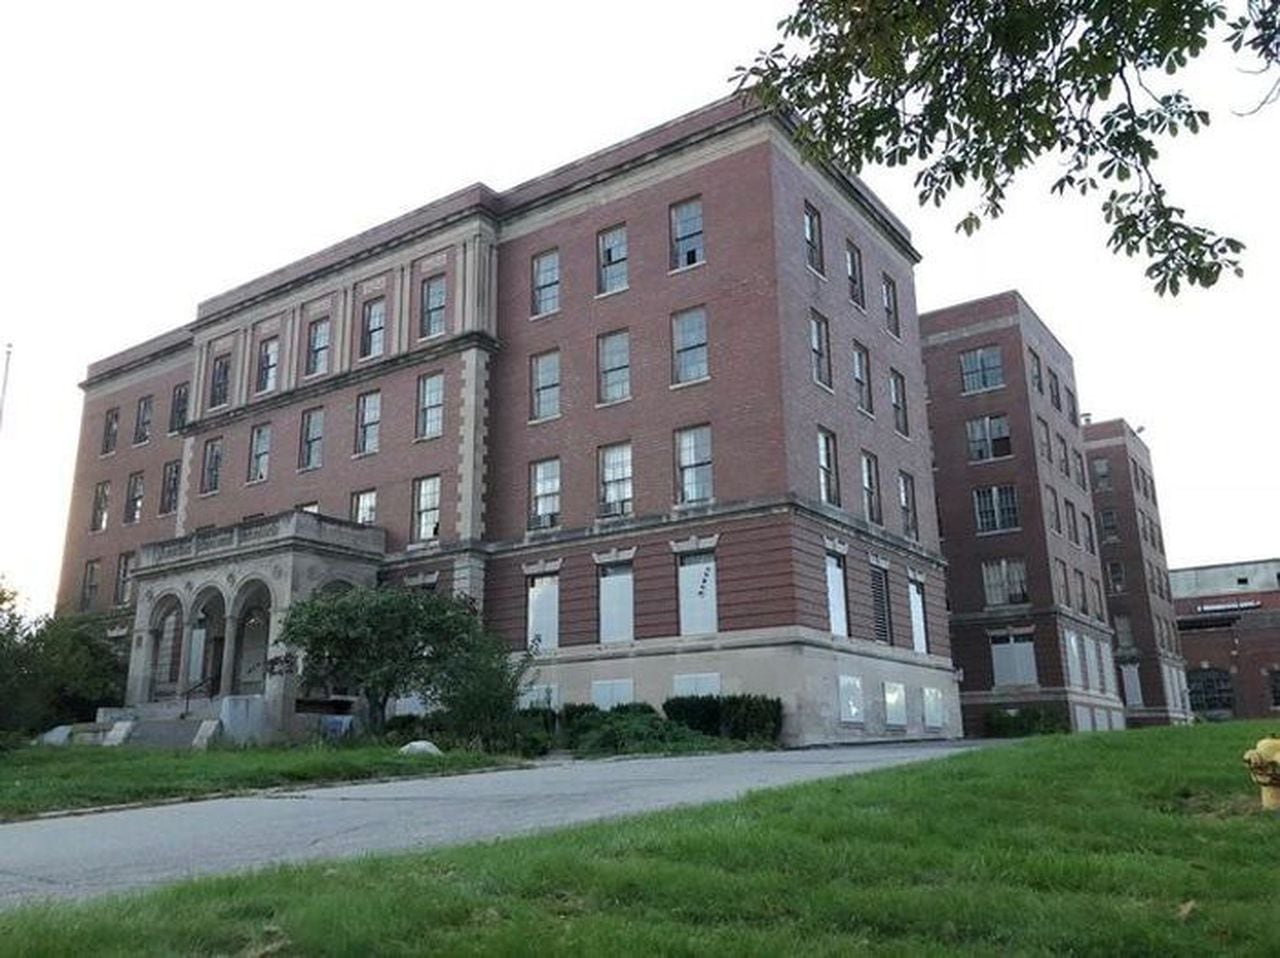  Abandoned Eloise Asylum to get $4M renovation into hotel, restaurant, haunted attraction 